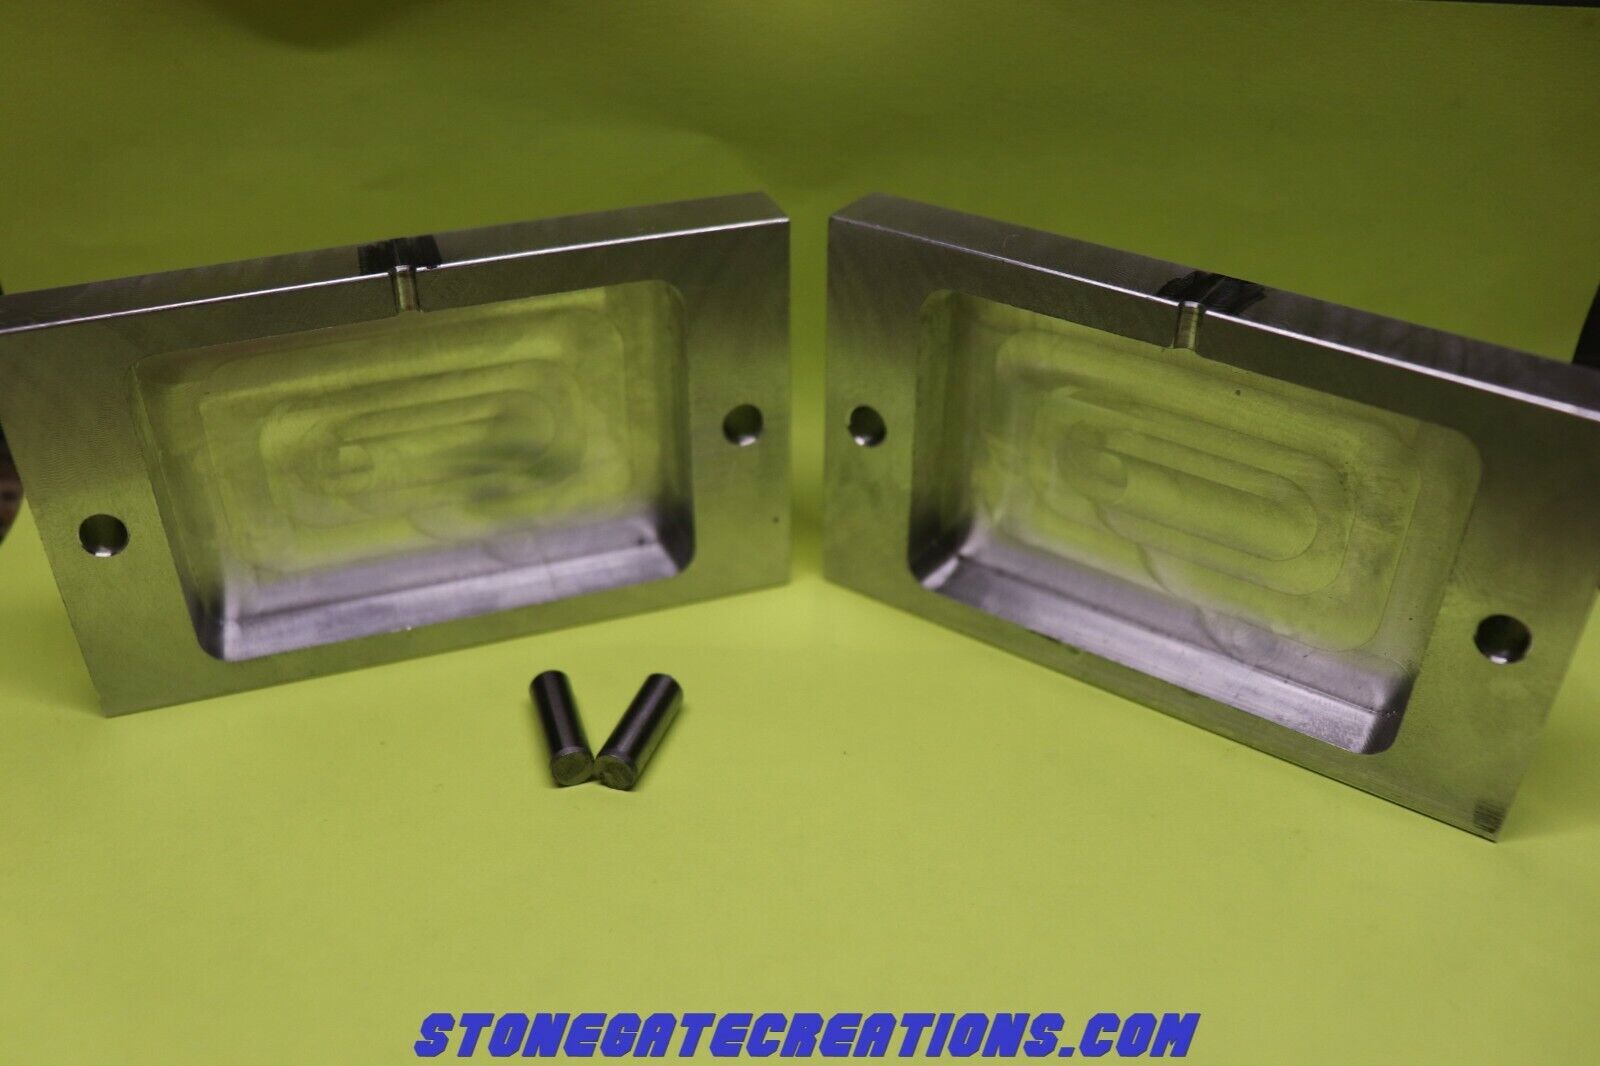 Aluminum Pocket Mold Frame for silicone, epoxy, or 3d printed Injection Mold